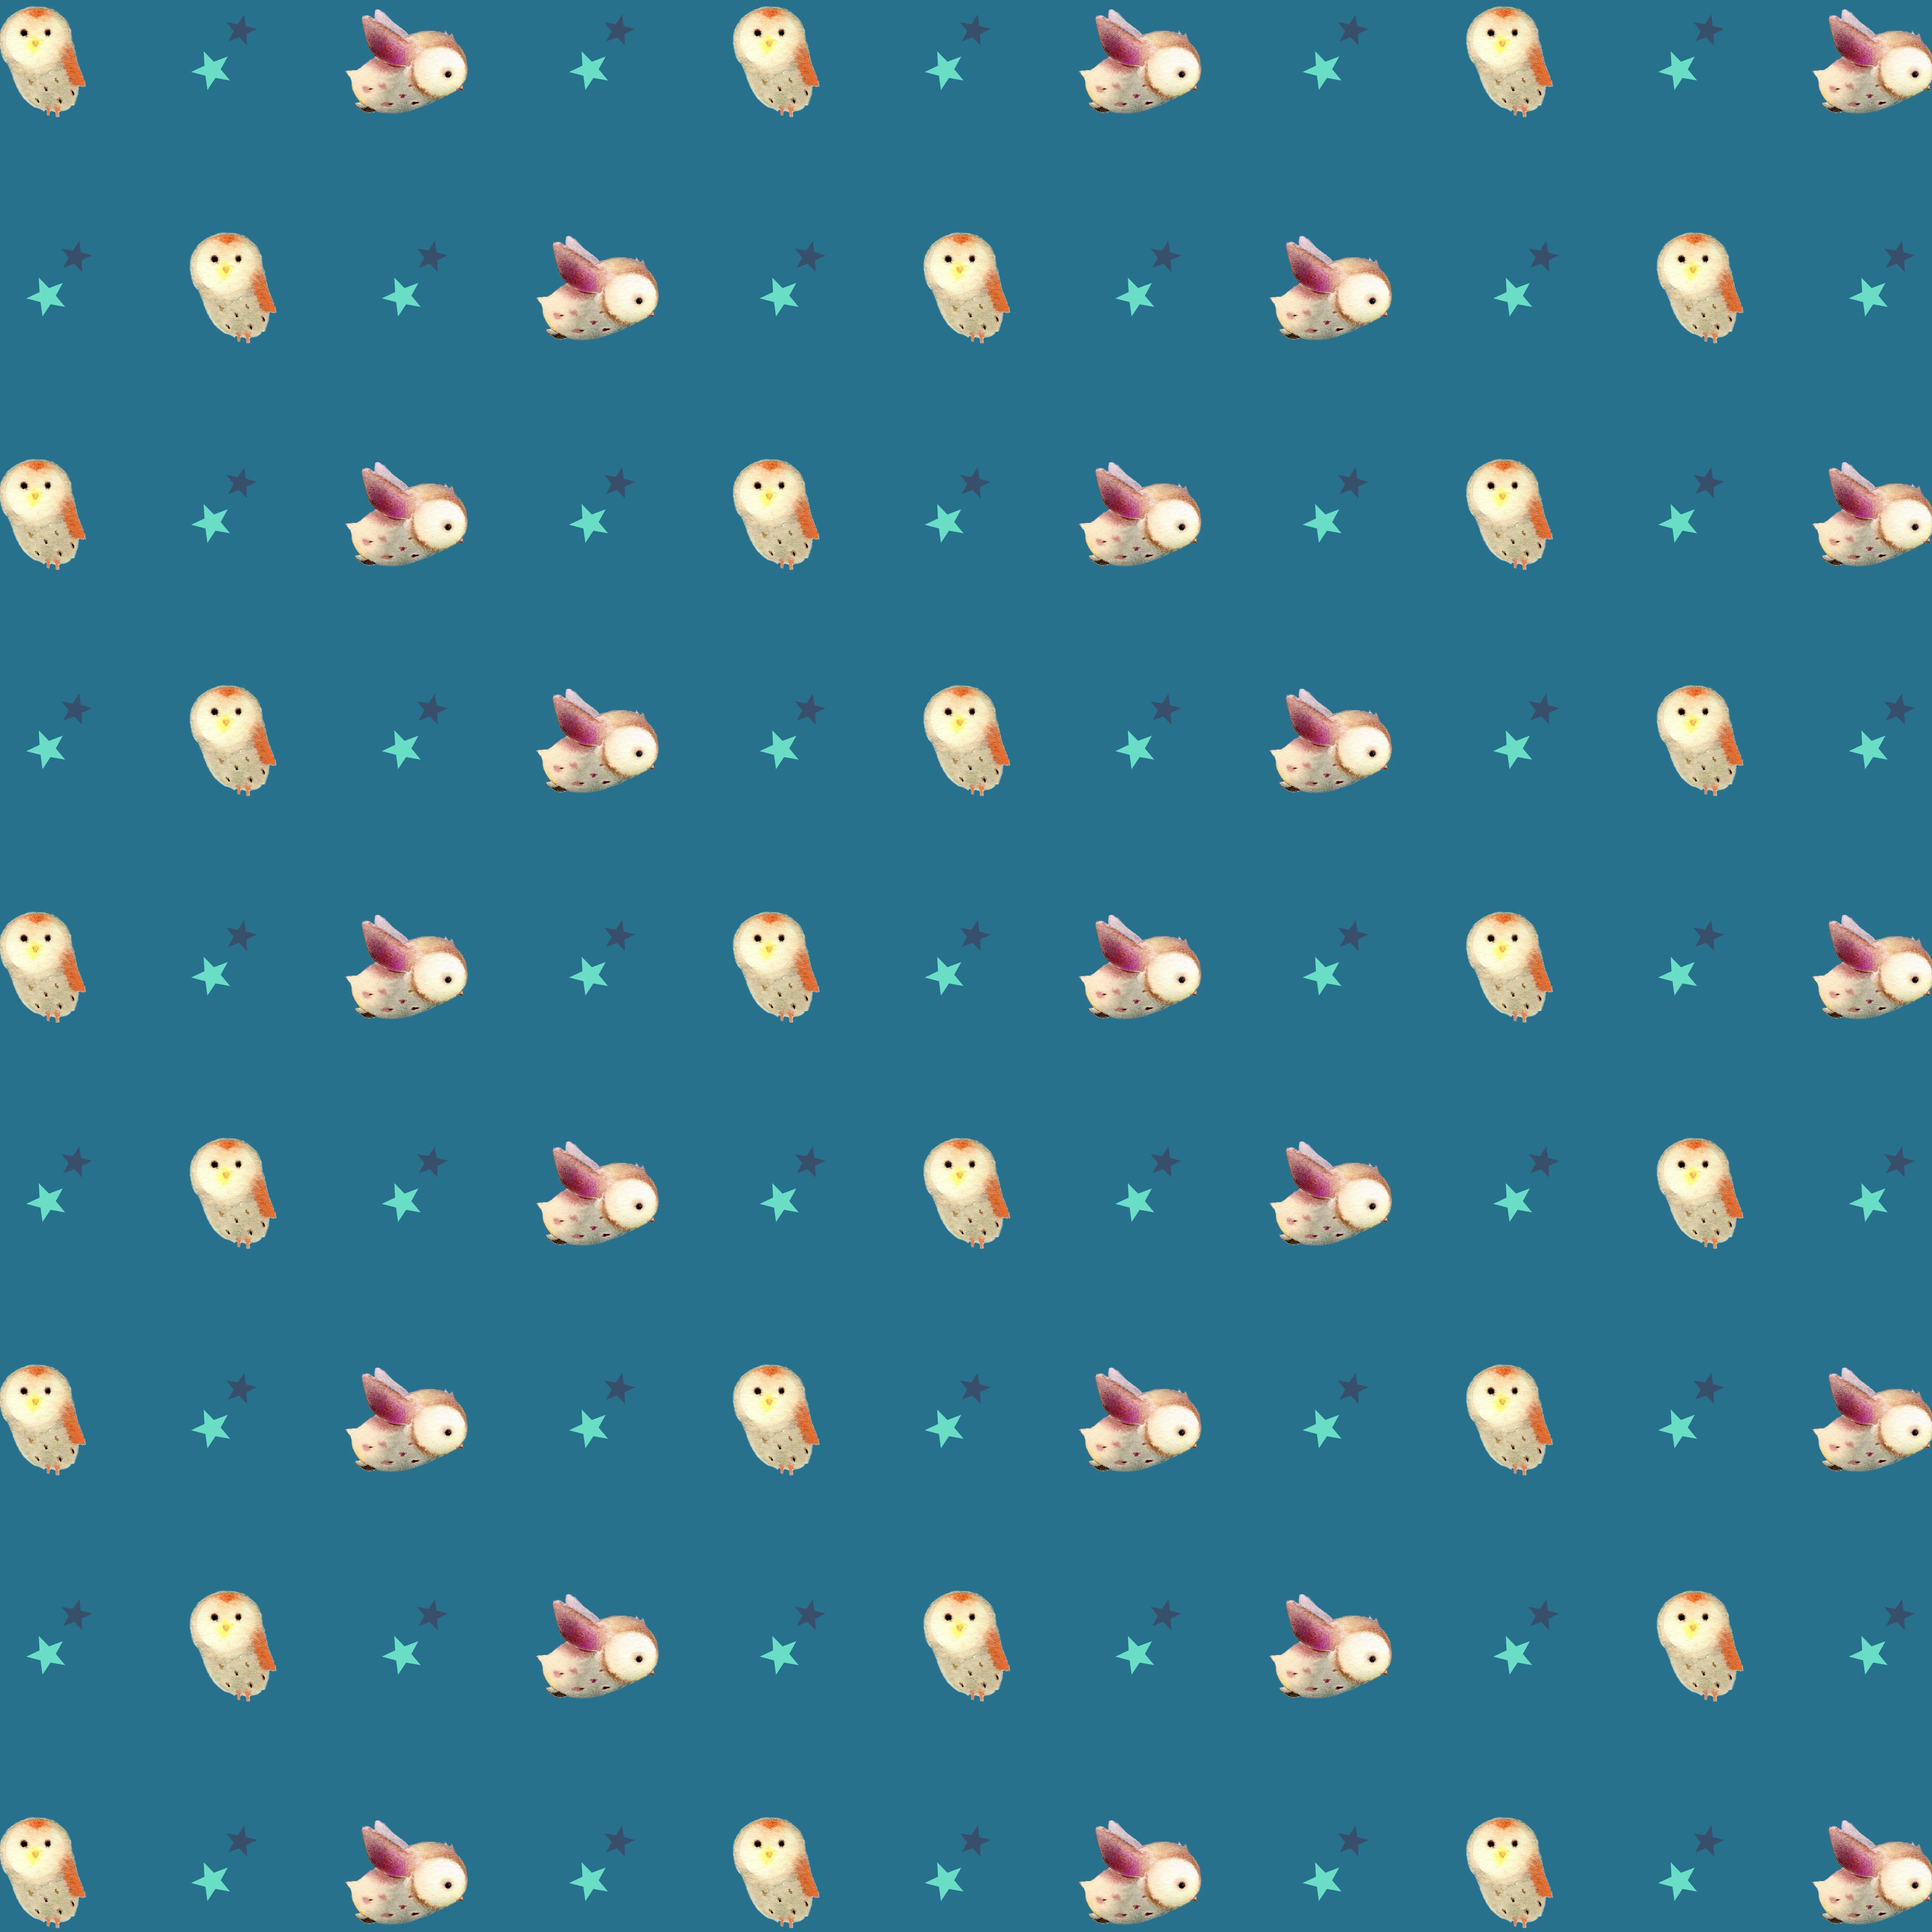 Gift Wrap featuring cute owls and stars on a dark dusky blue coloured wrap. Full image pic